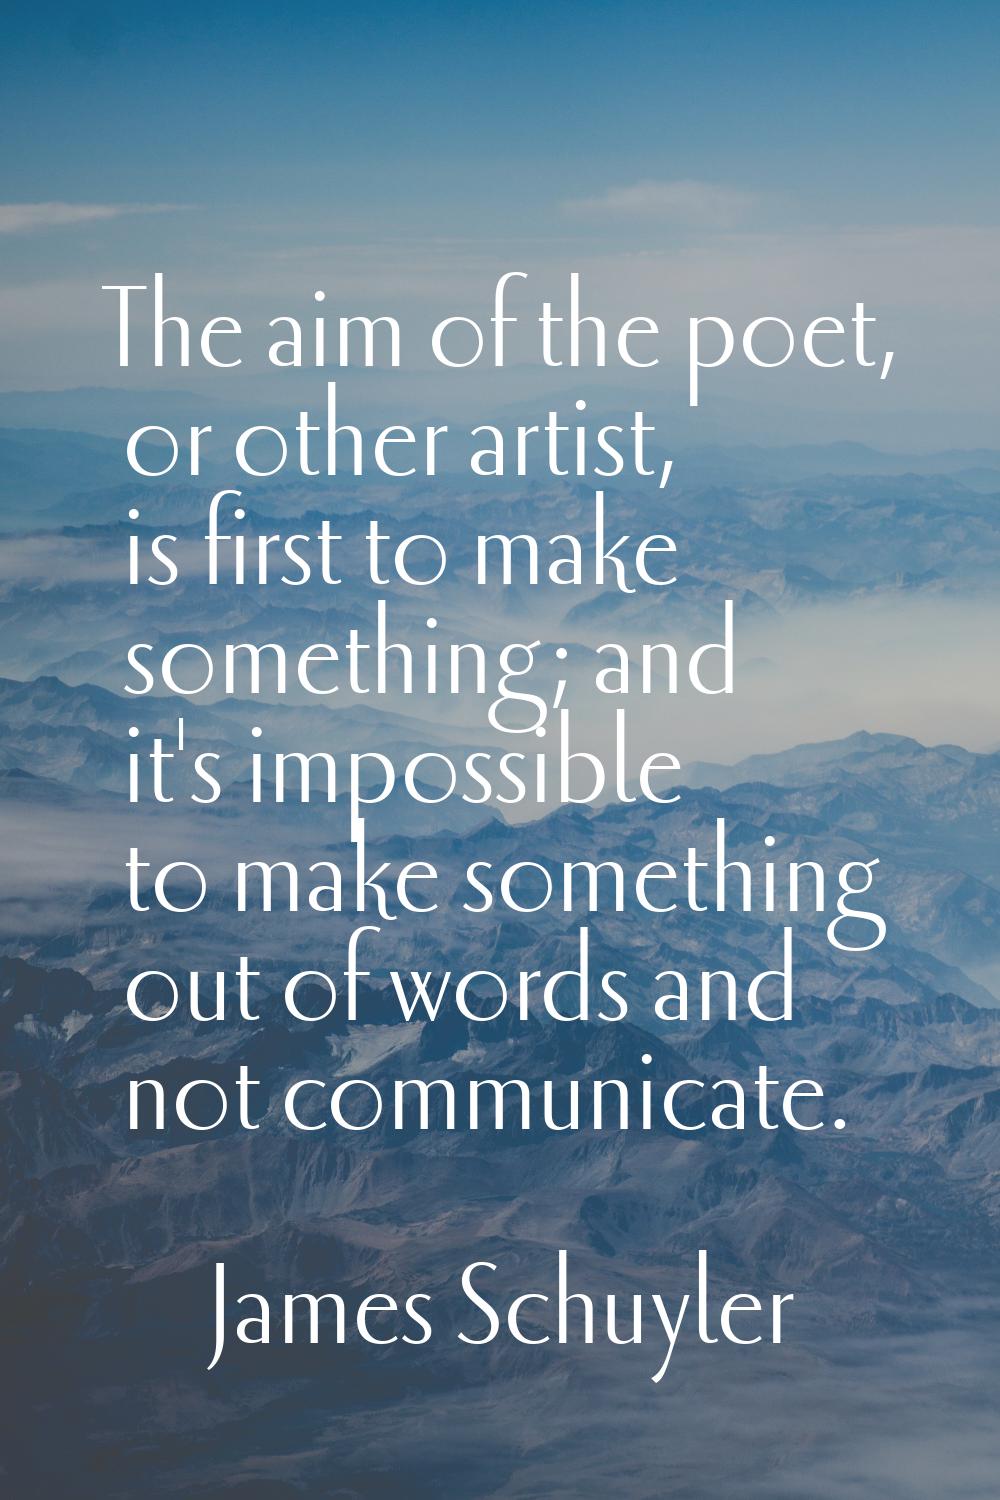 The aim of the poet, or other artist, is first to make something; and it's impossible to make somet